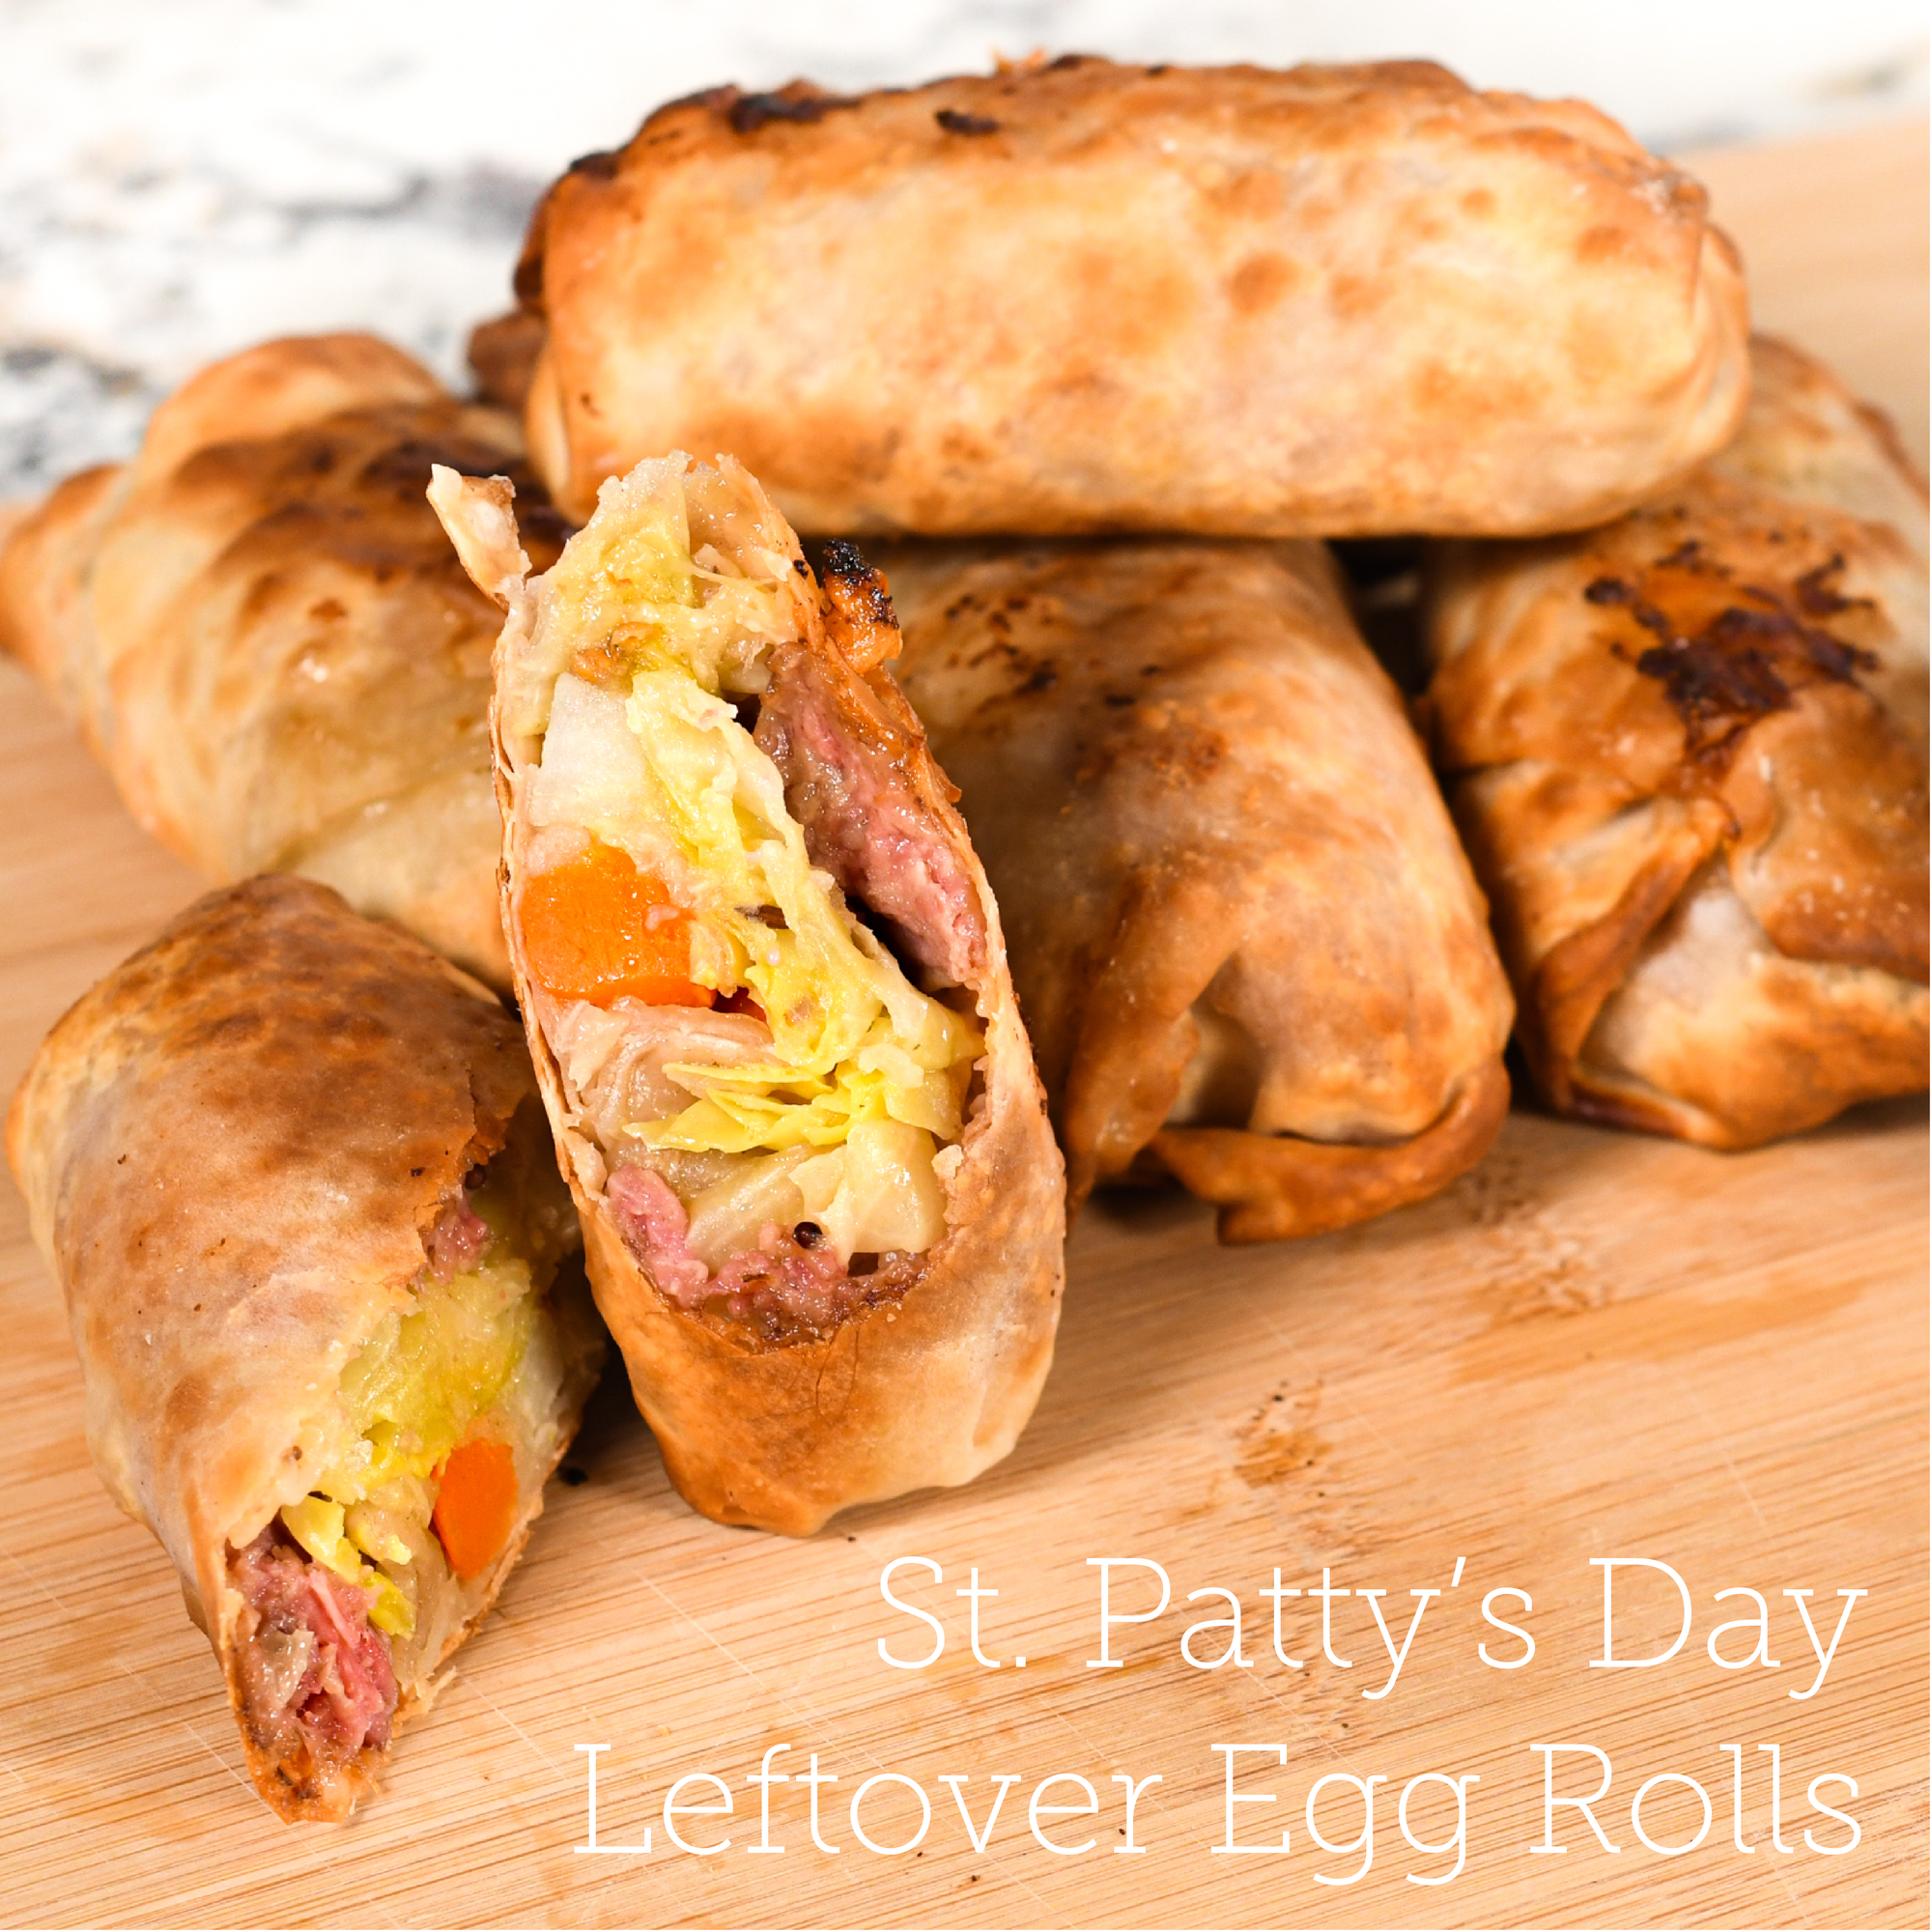 St. Patty's Day Leftover Egg Rolls